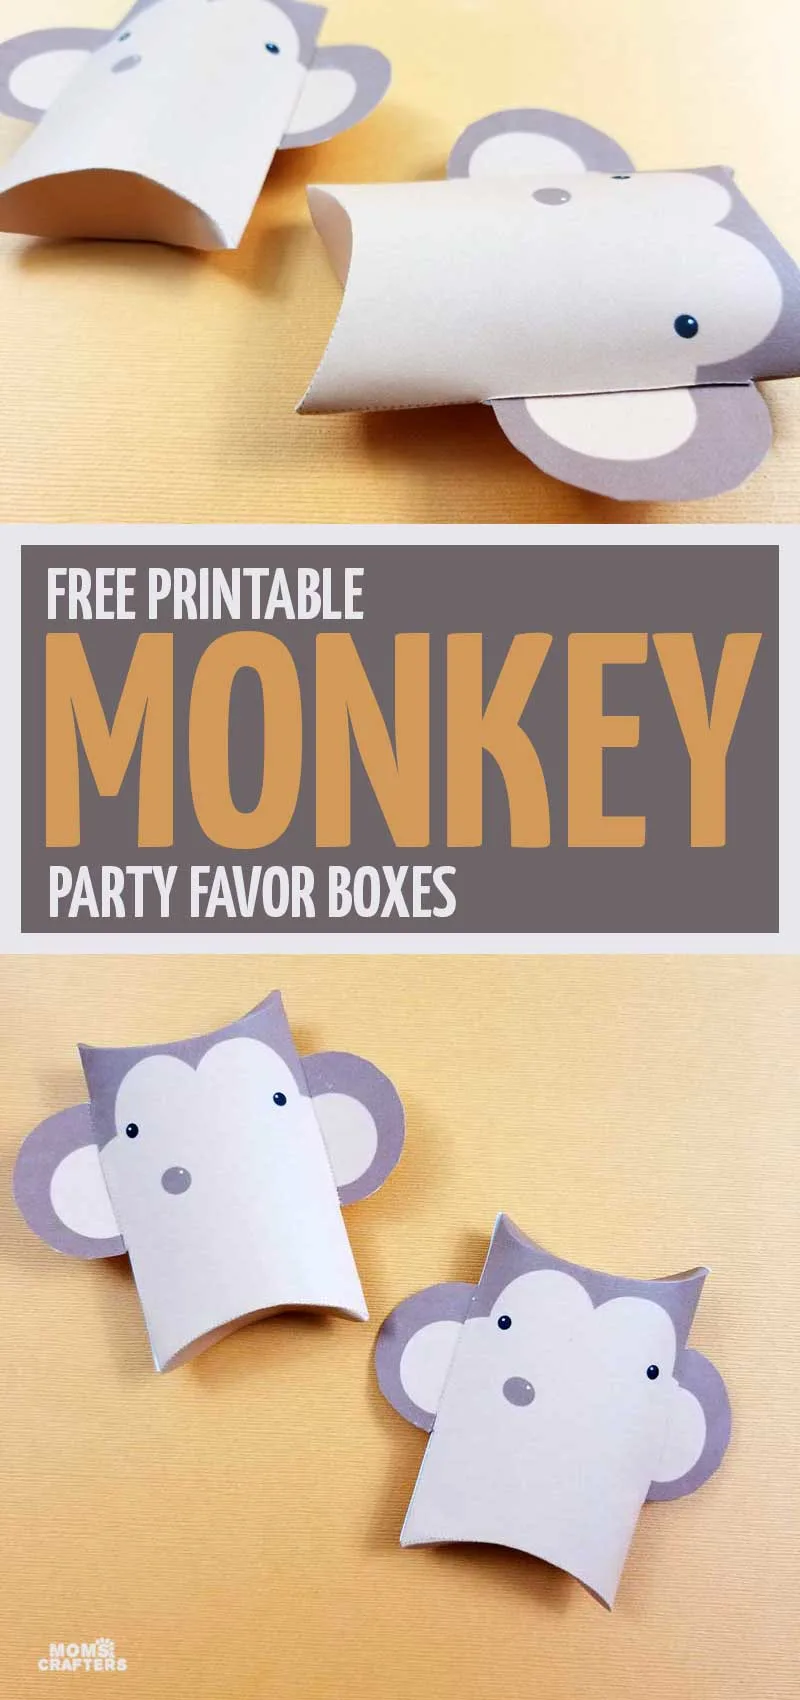 Pin it: these fun monkey party favors will be the hit of your monkey birthday parties! Click for the free printable treat boxes. More monkey birthday party ideas coming soon.